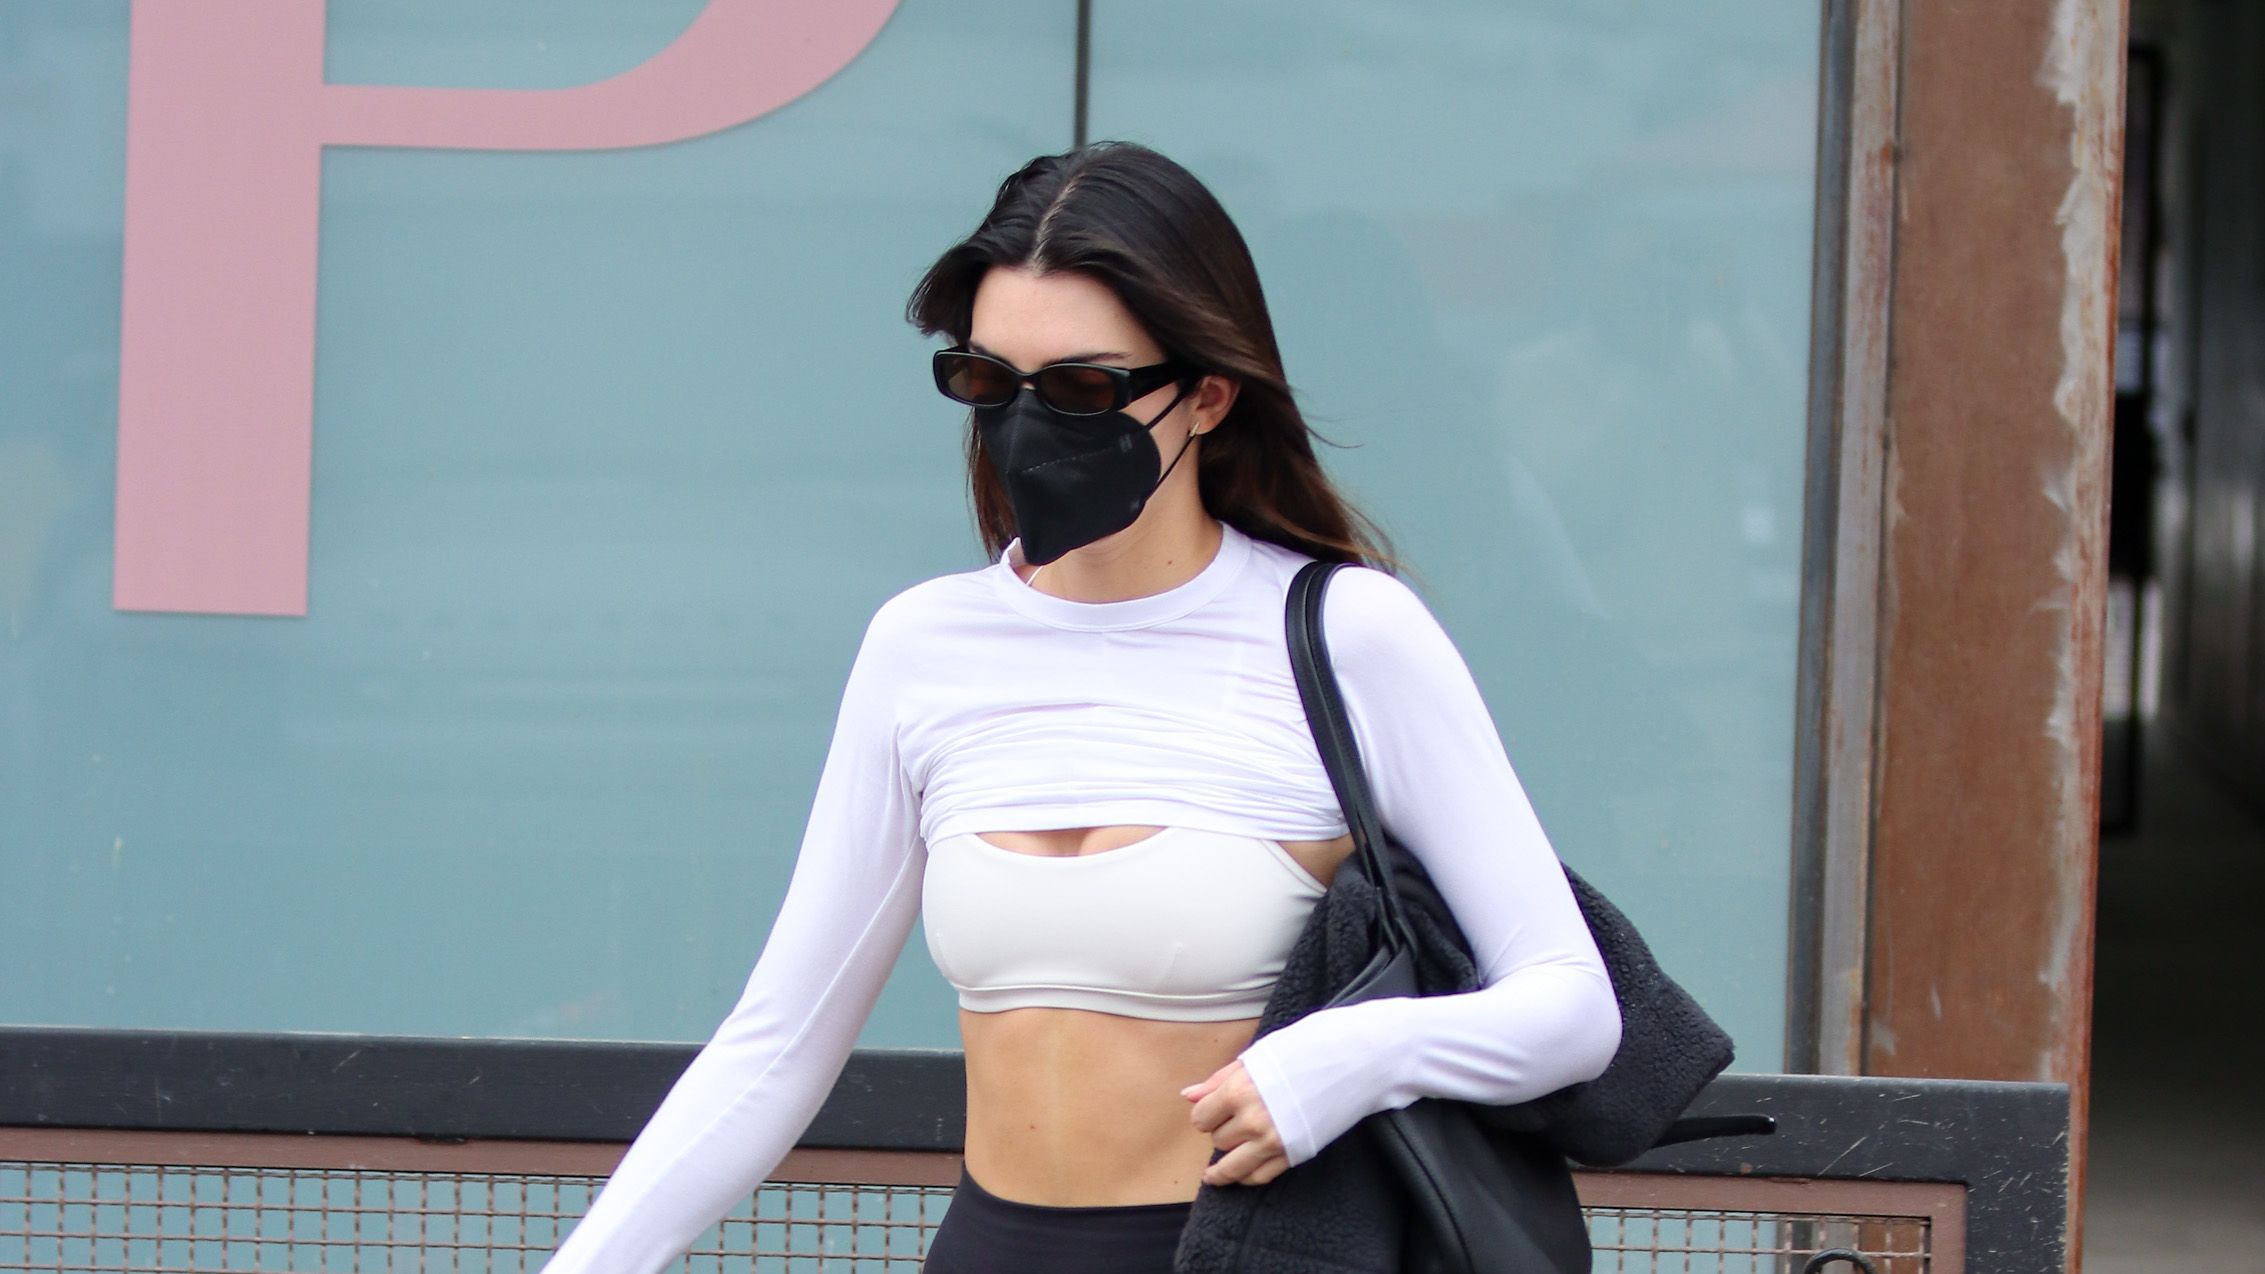 Hailey Bieber Went to Pilates in the Tiniest Bra and Short Set